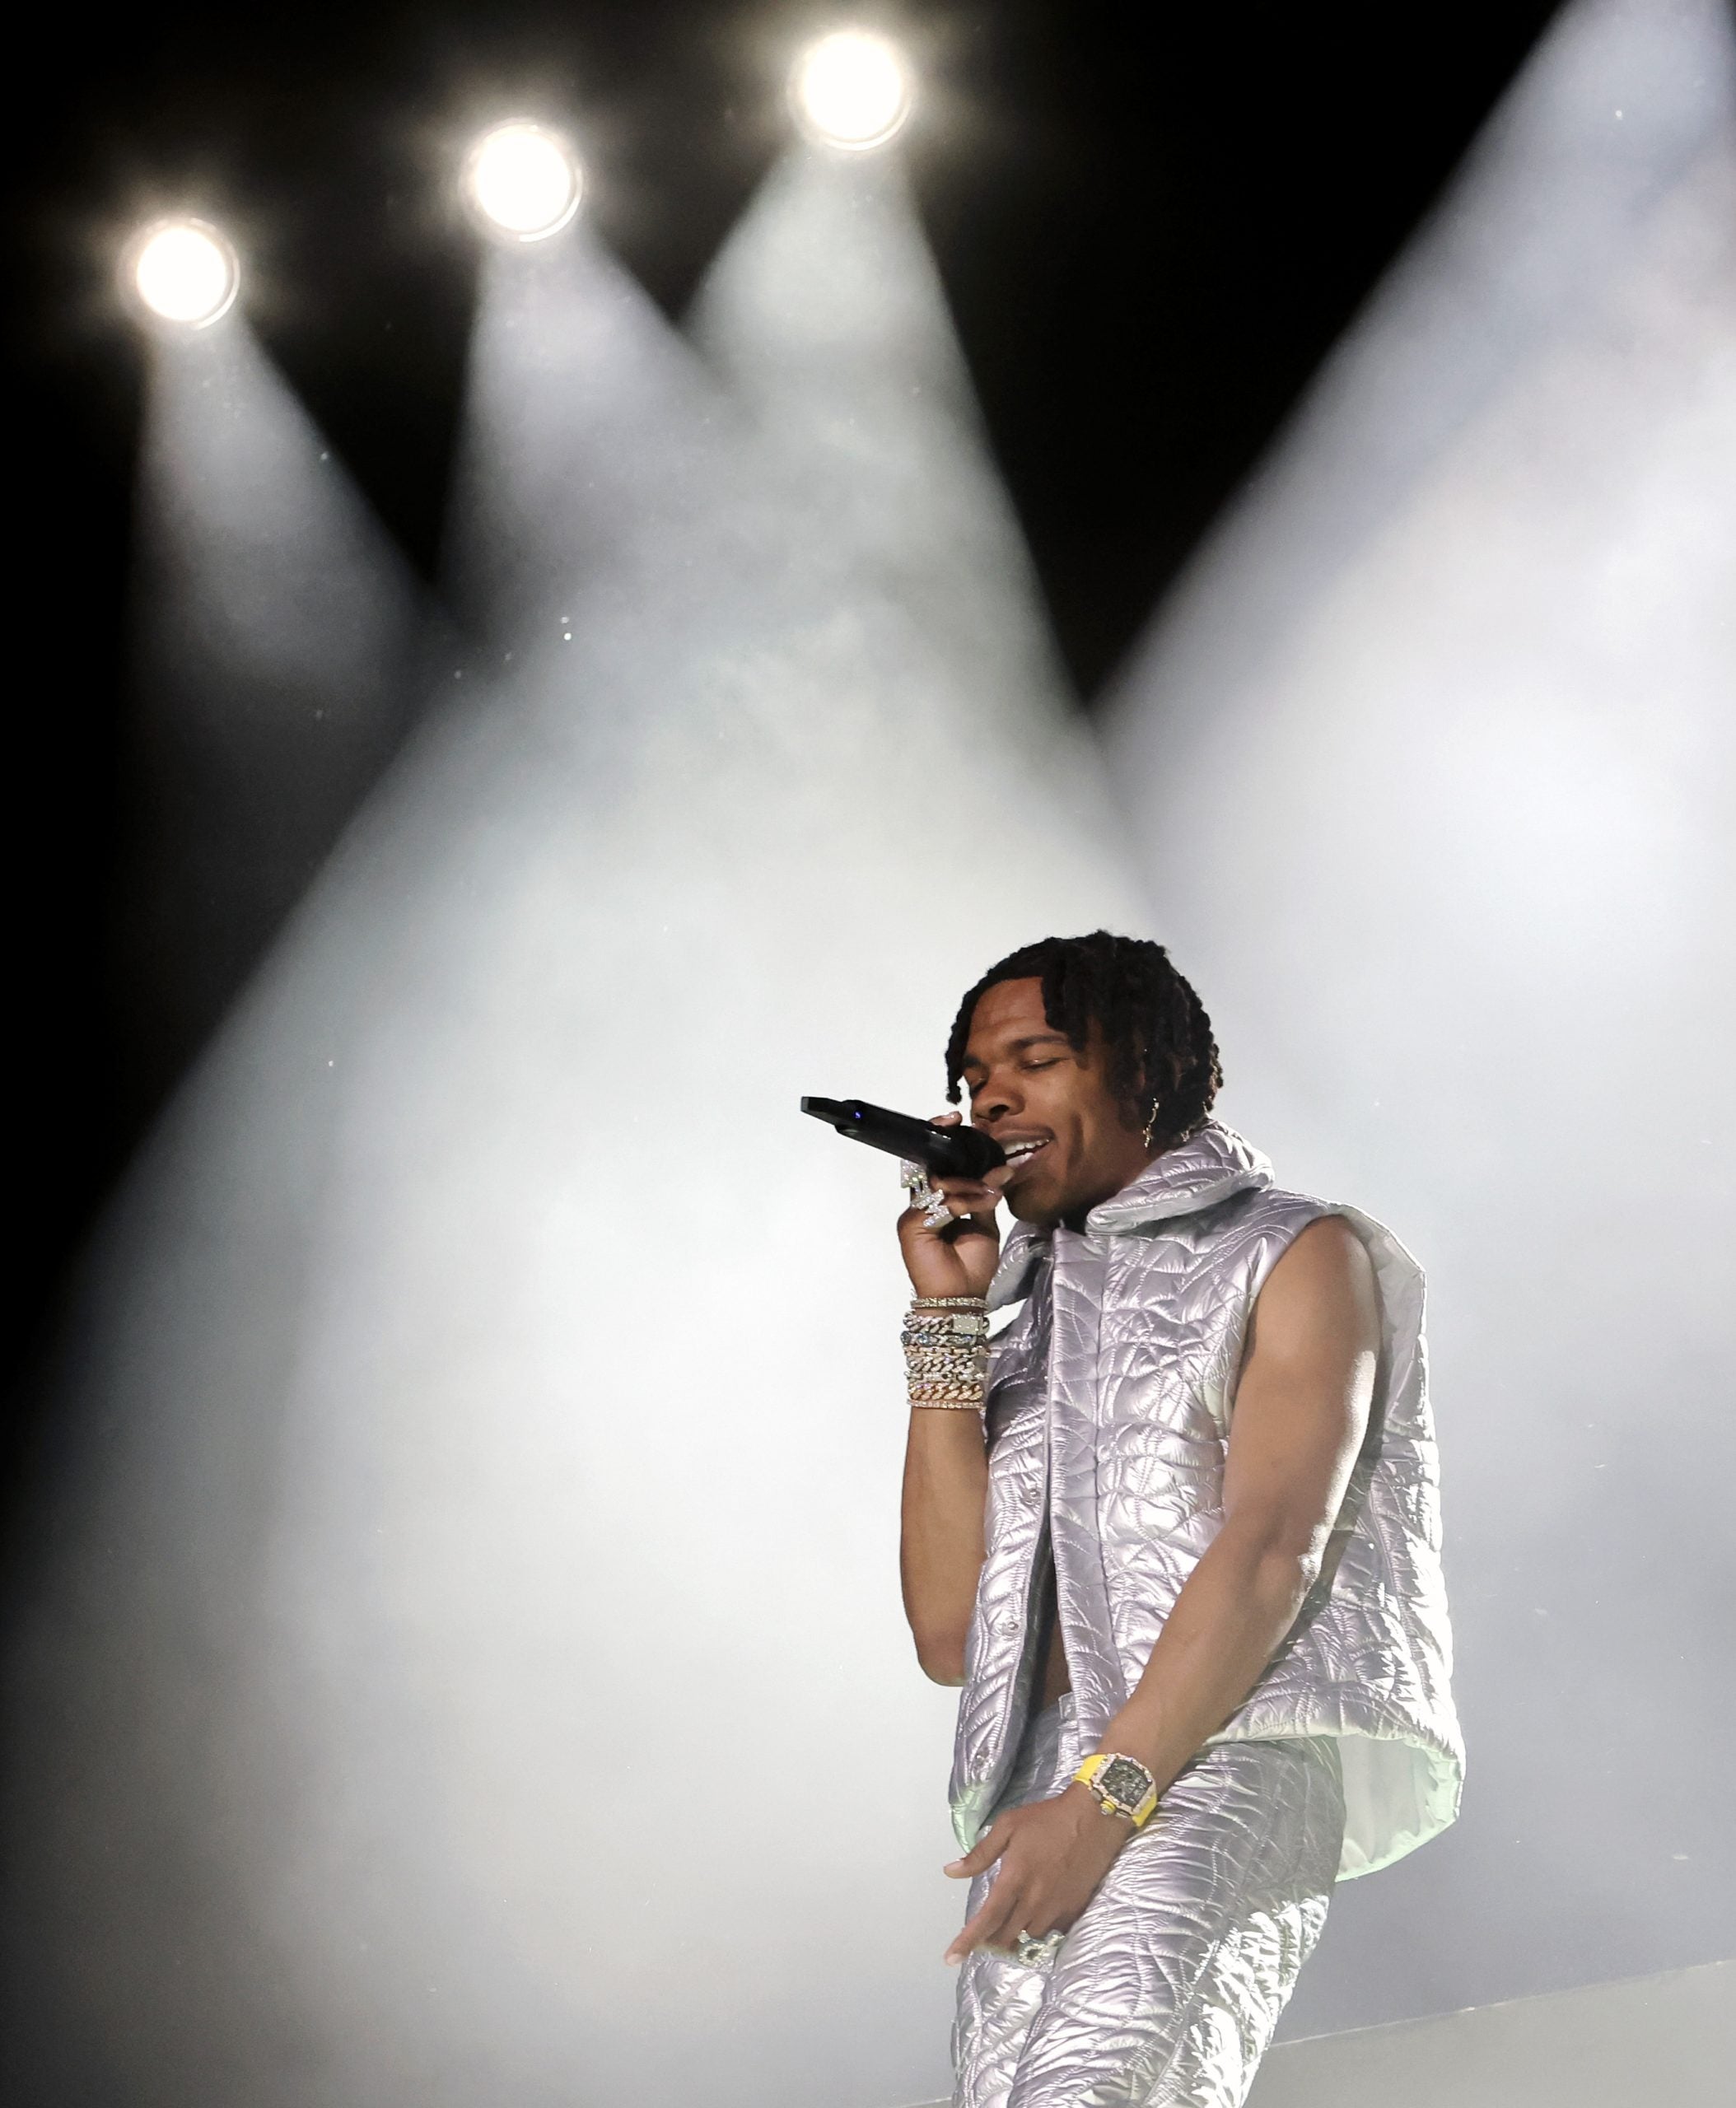 Coachella: Stars Storm The Stage On Weekend 1